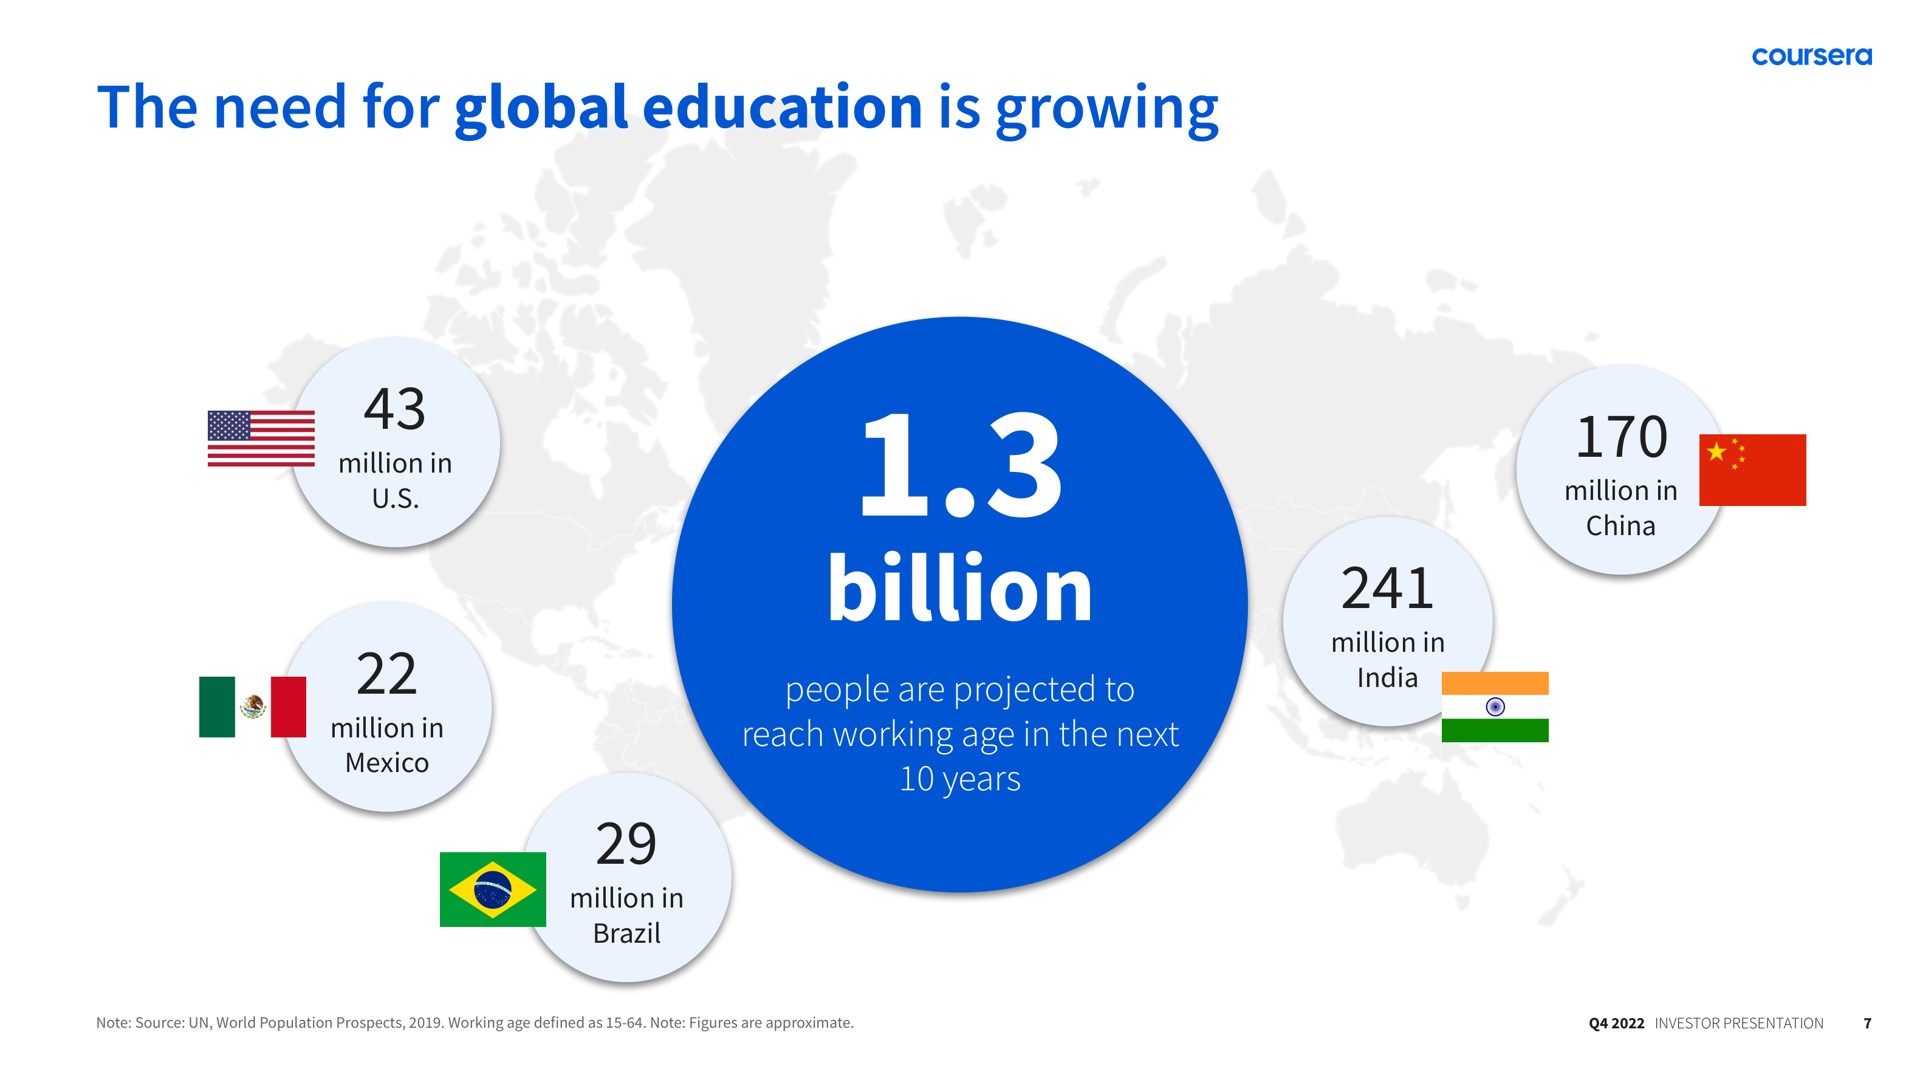 the need for global education is growing billion | Coursera